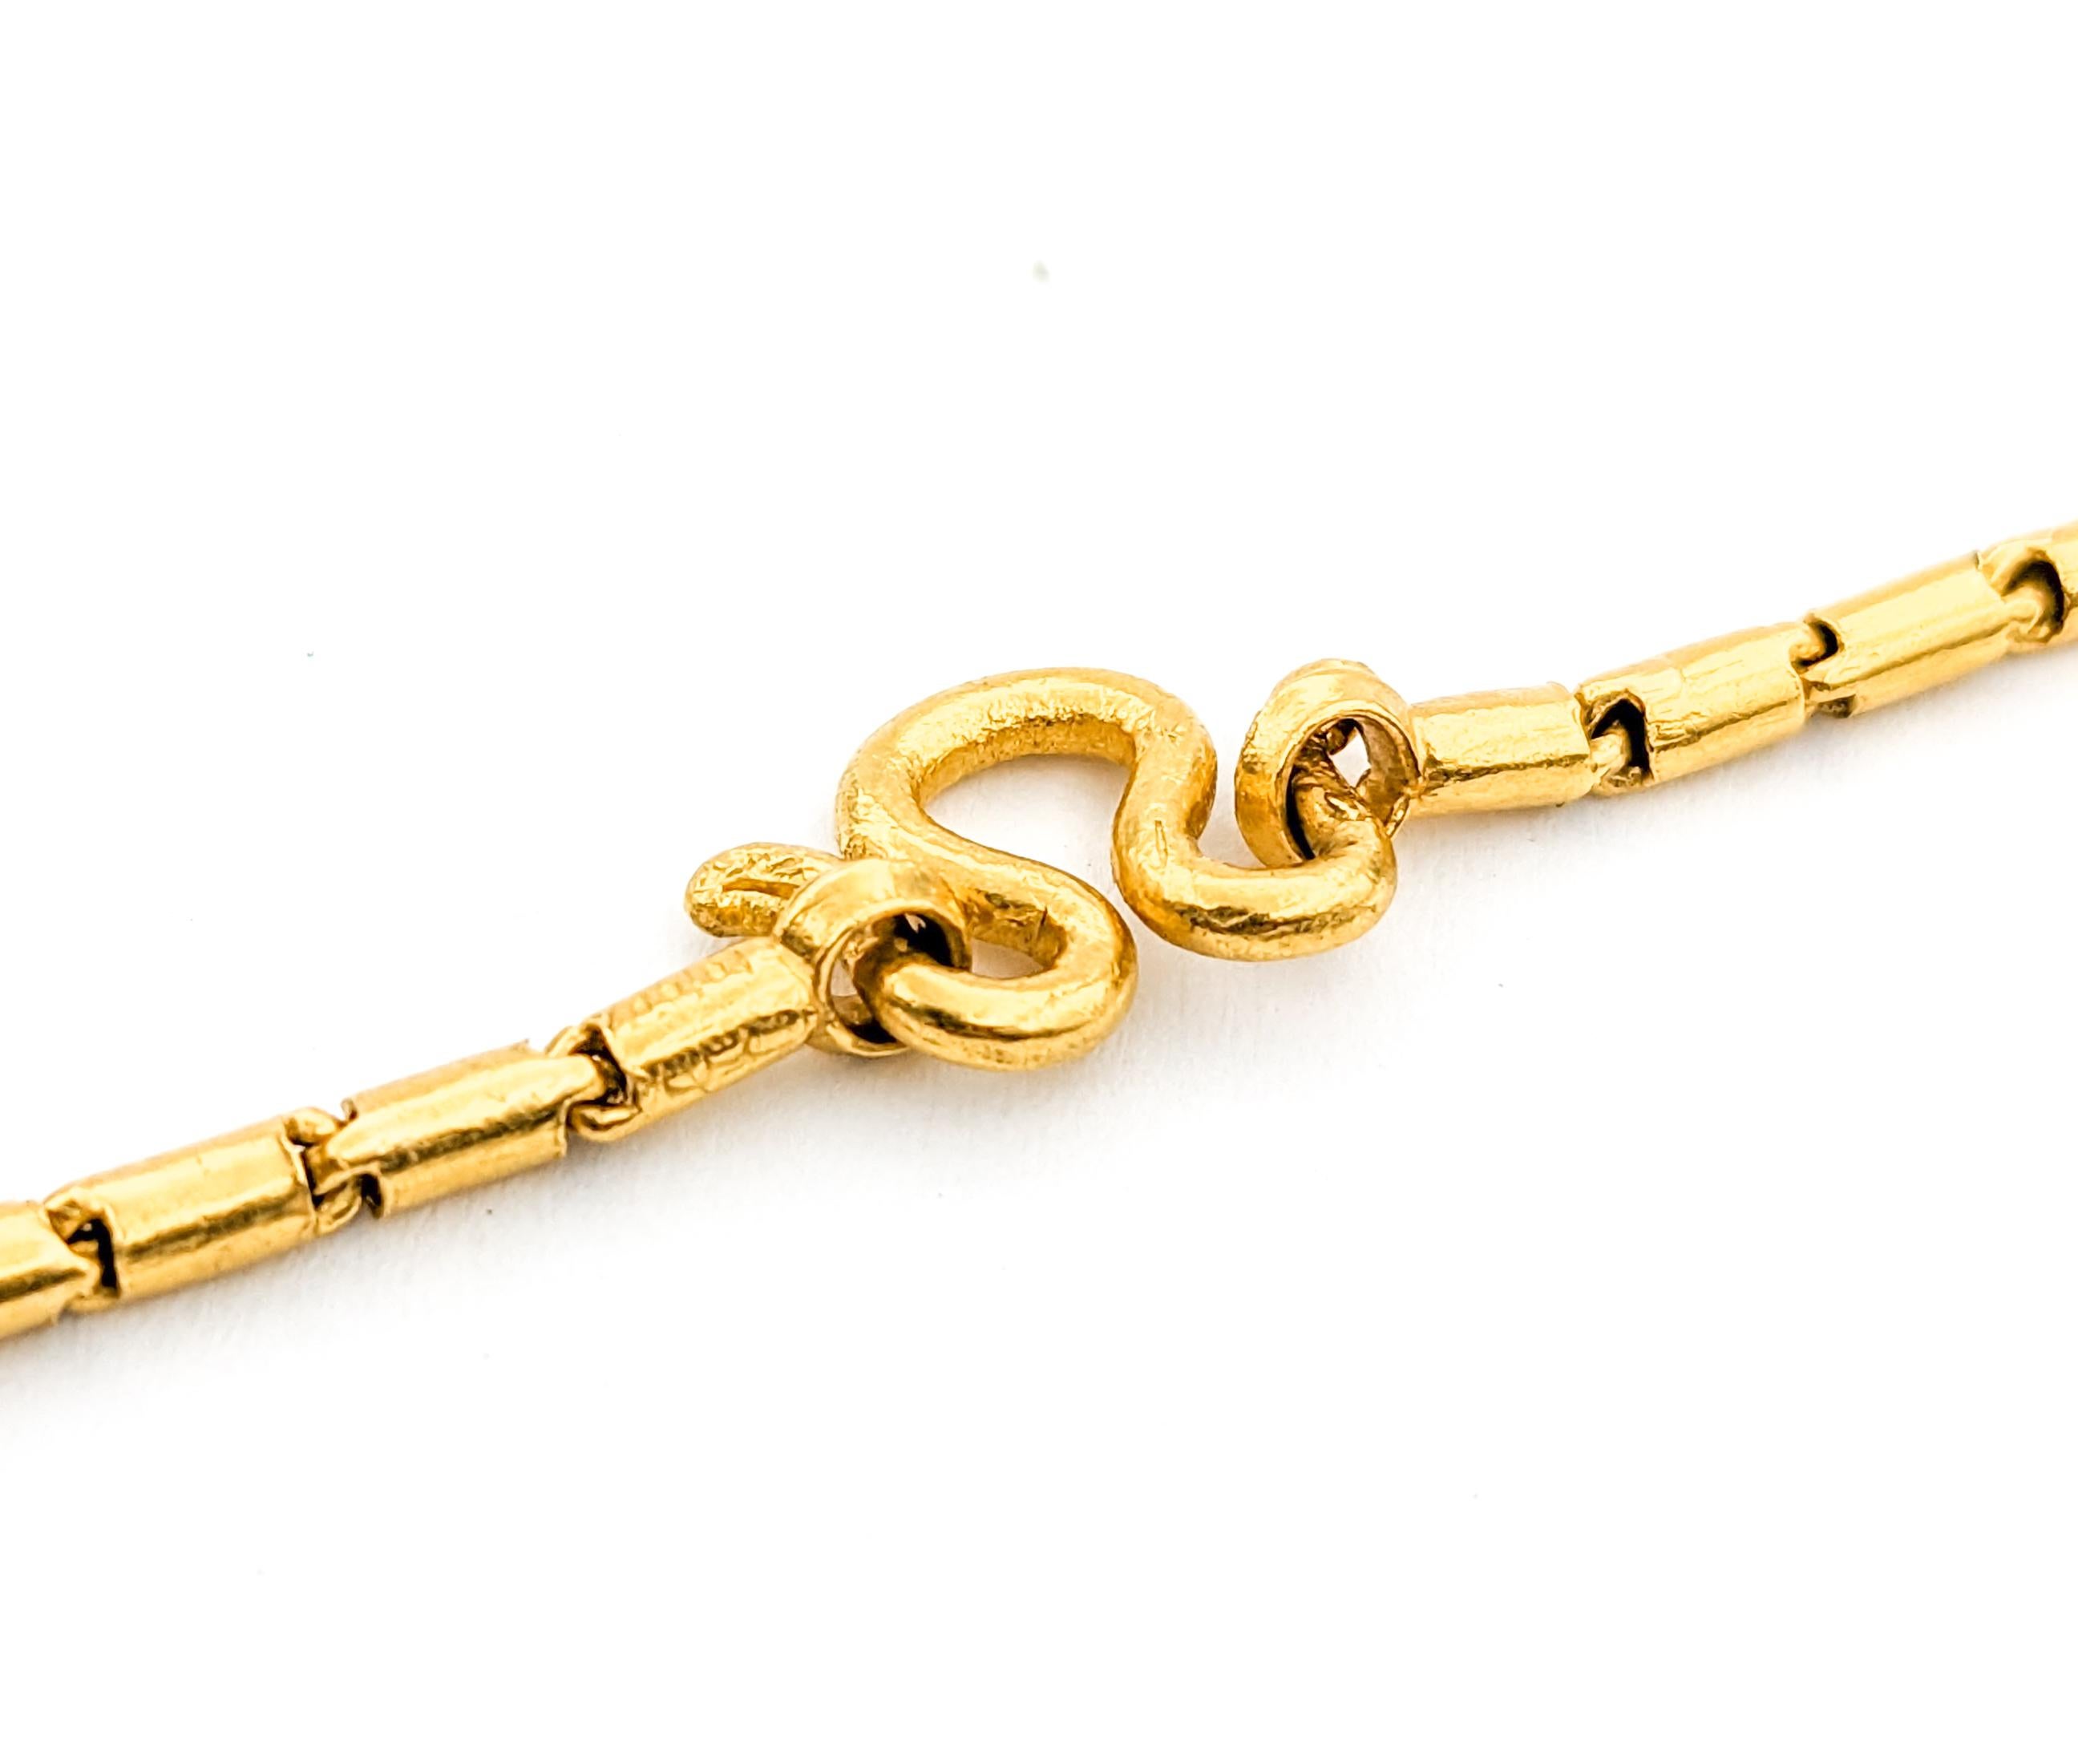 Modern Vintage Barrel Link Chain Necklace in 21k Yellow Gold For Sale